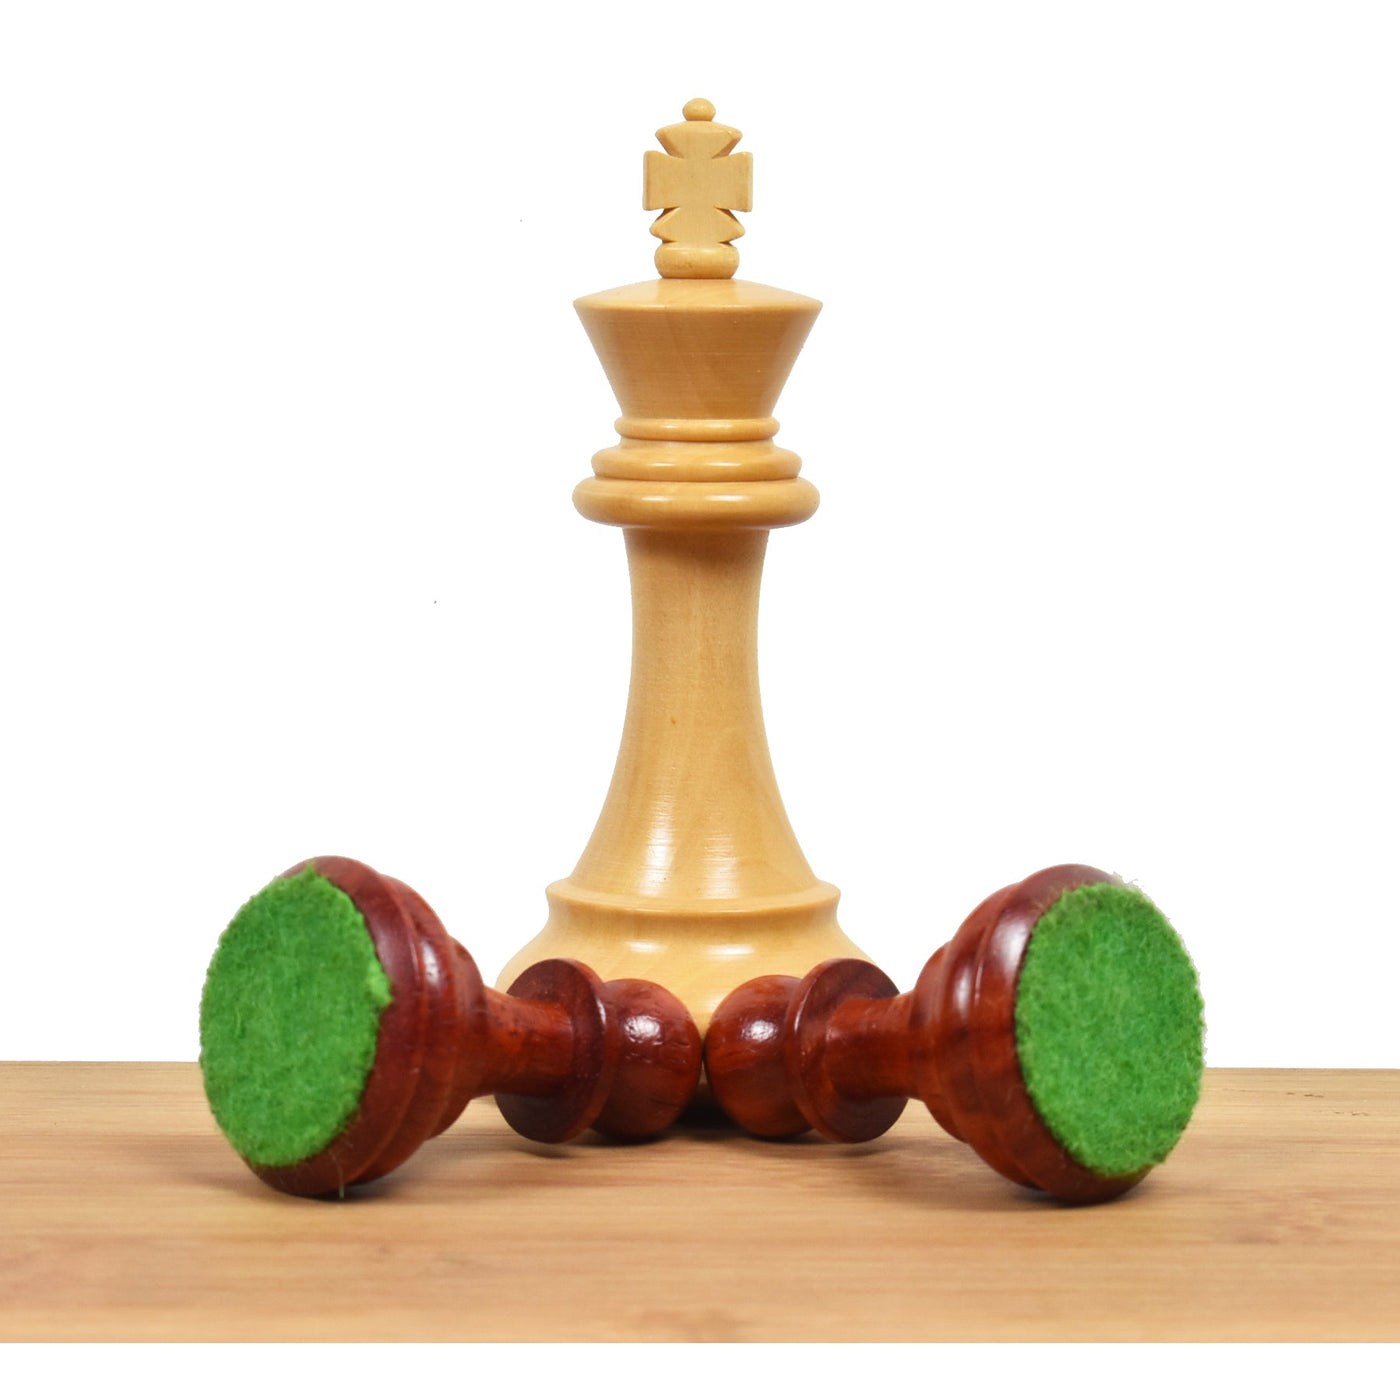 Exclusive Alban Staunton Weighted Chess Pieces set